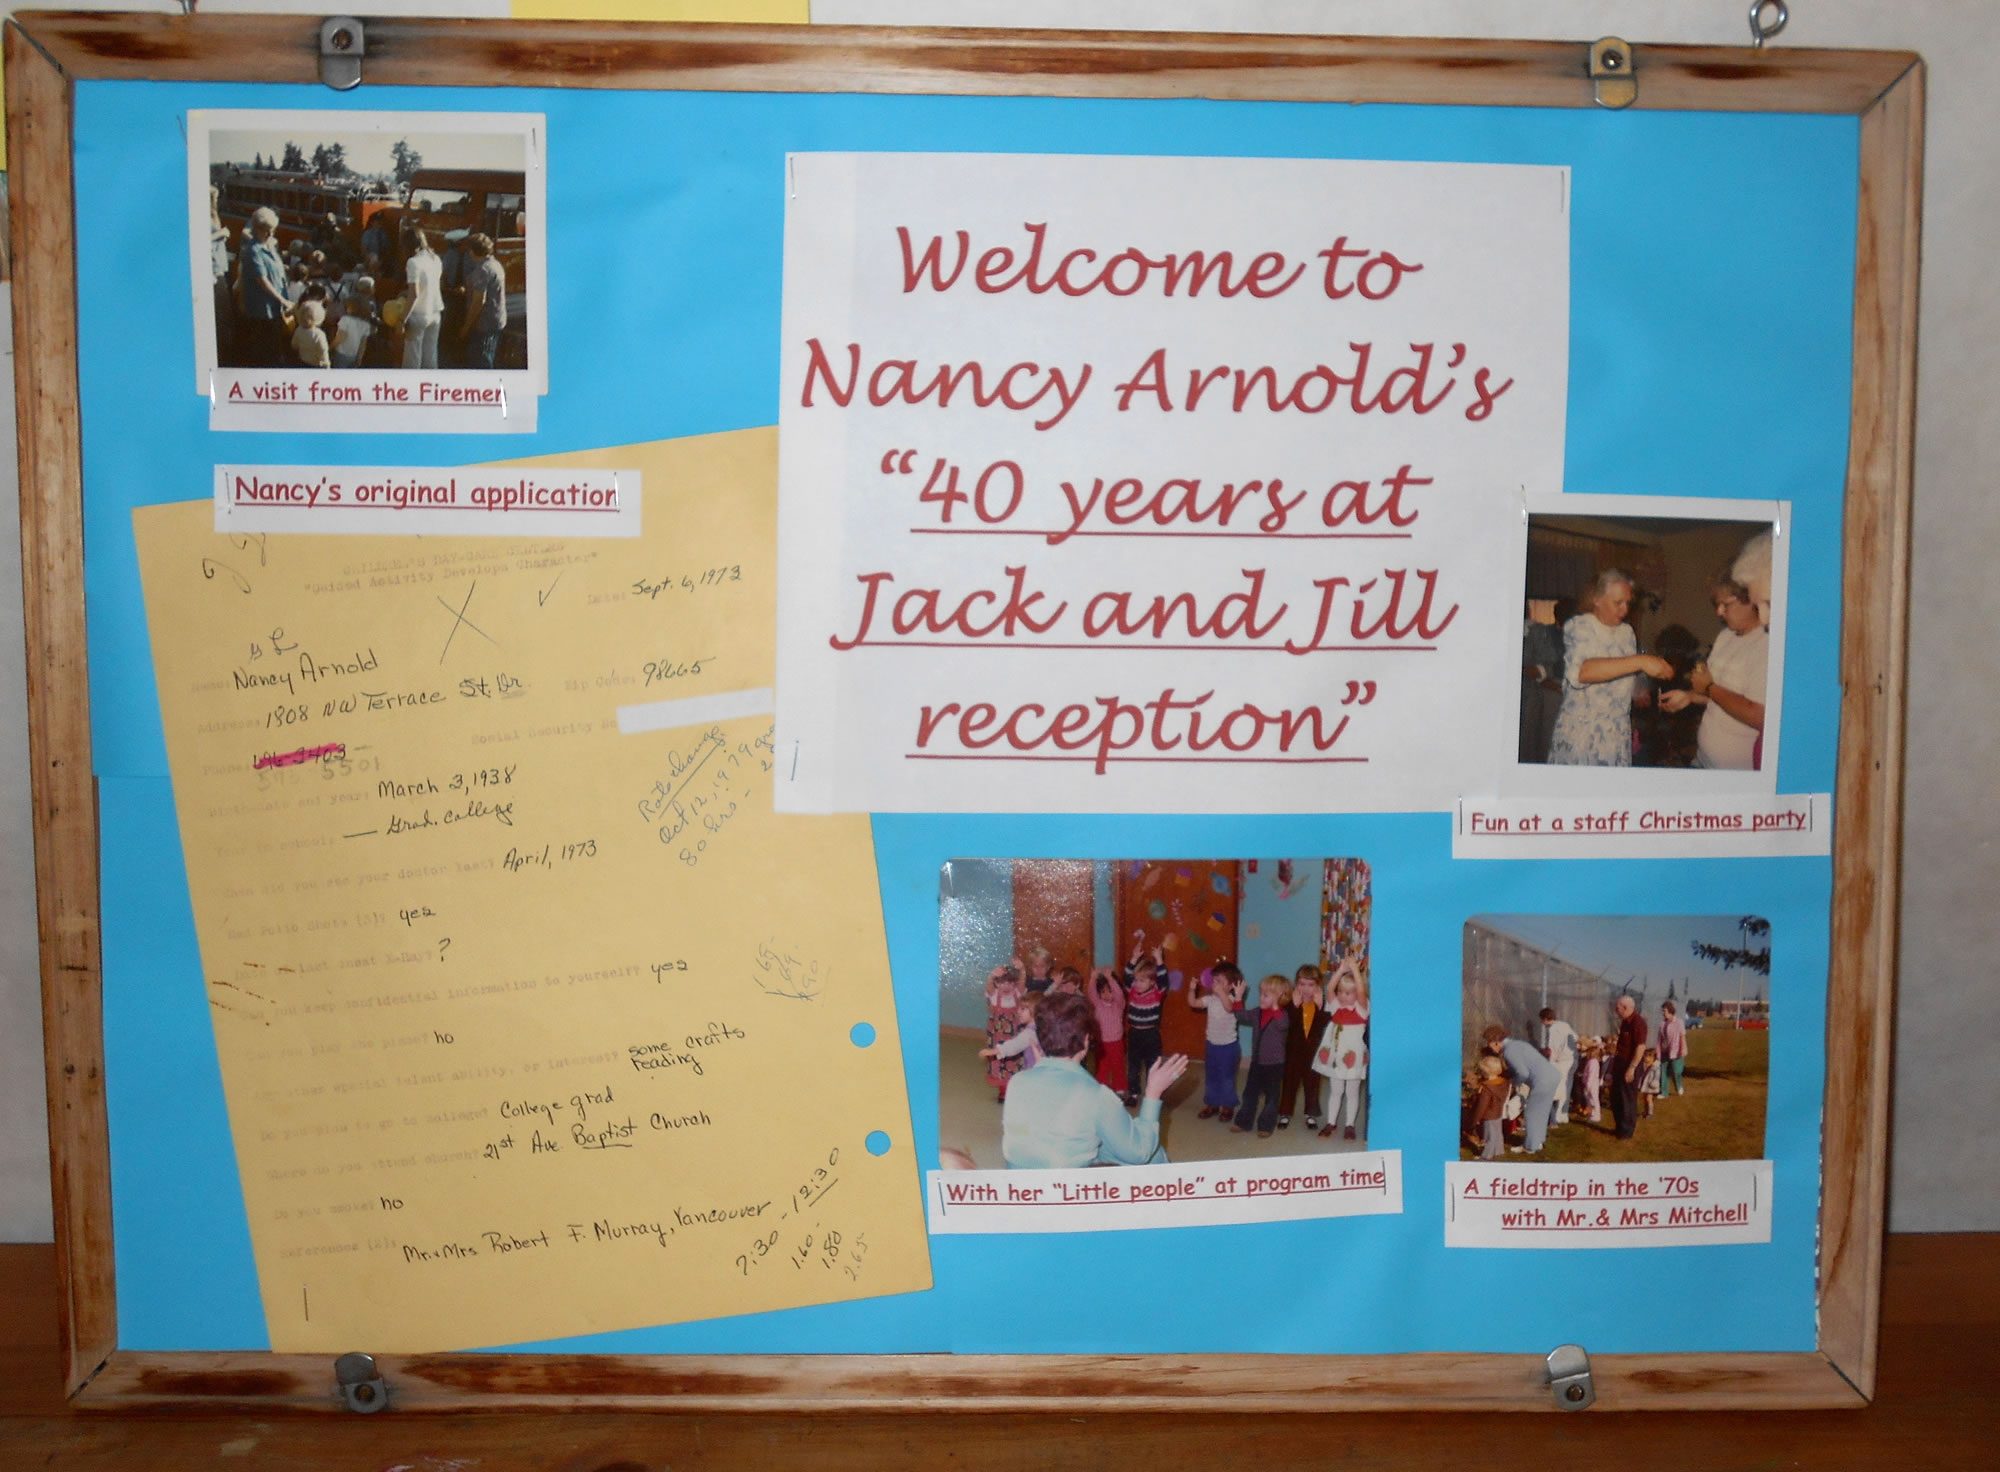 Northeast Hazel Dell: Jack and Jill House employee Nancy Arnold's 40 years of work were celebrated last month with a reception that showcased photos and other memorabilia, including her application from 1973, above.